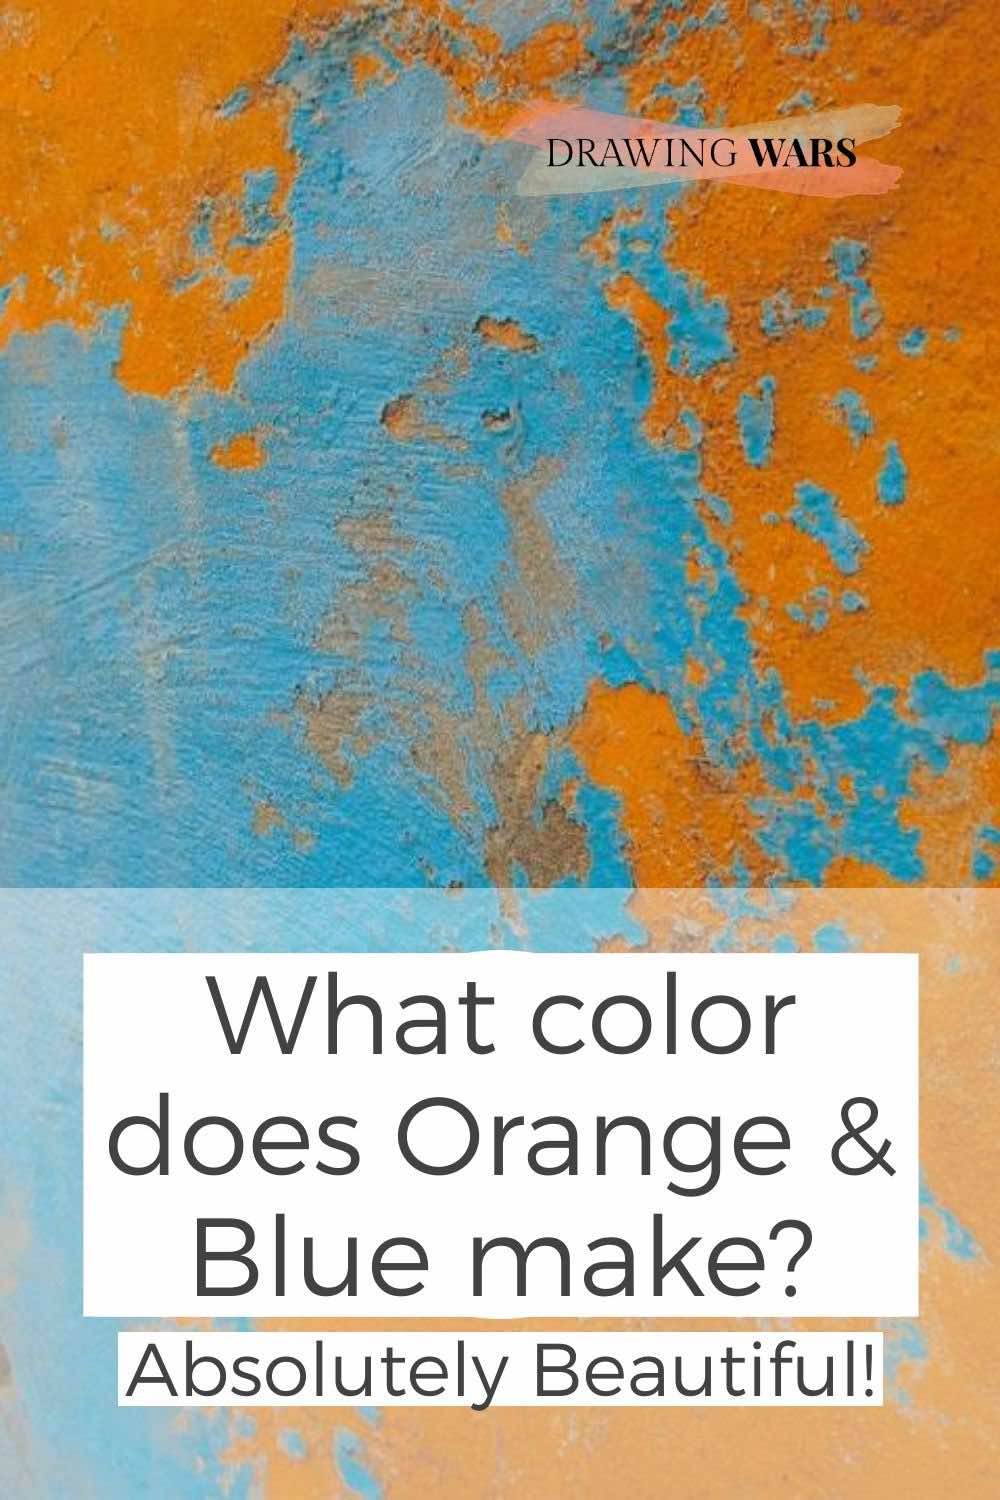 What color does Orange & Blue make? Absolutely Beautiful!